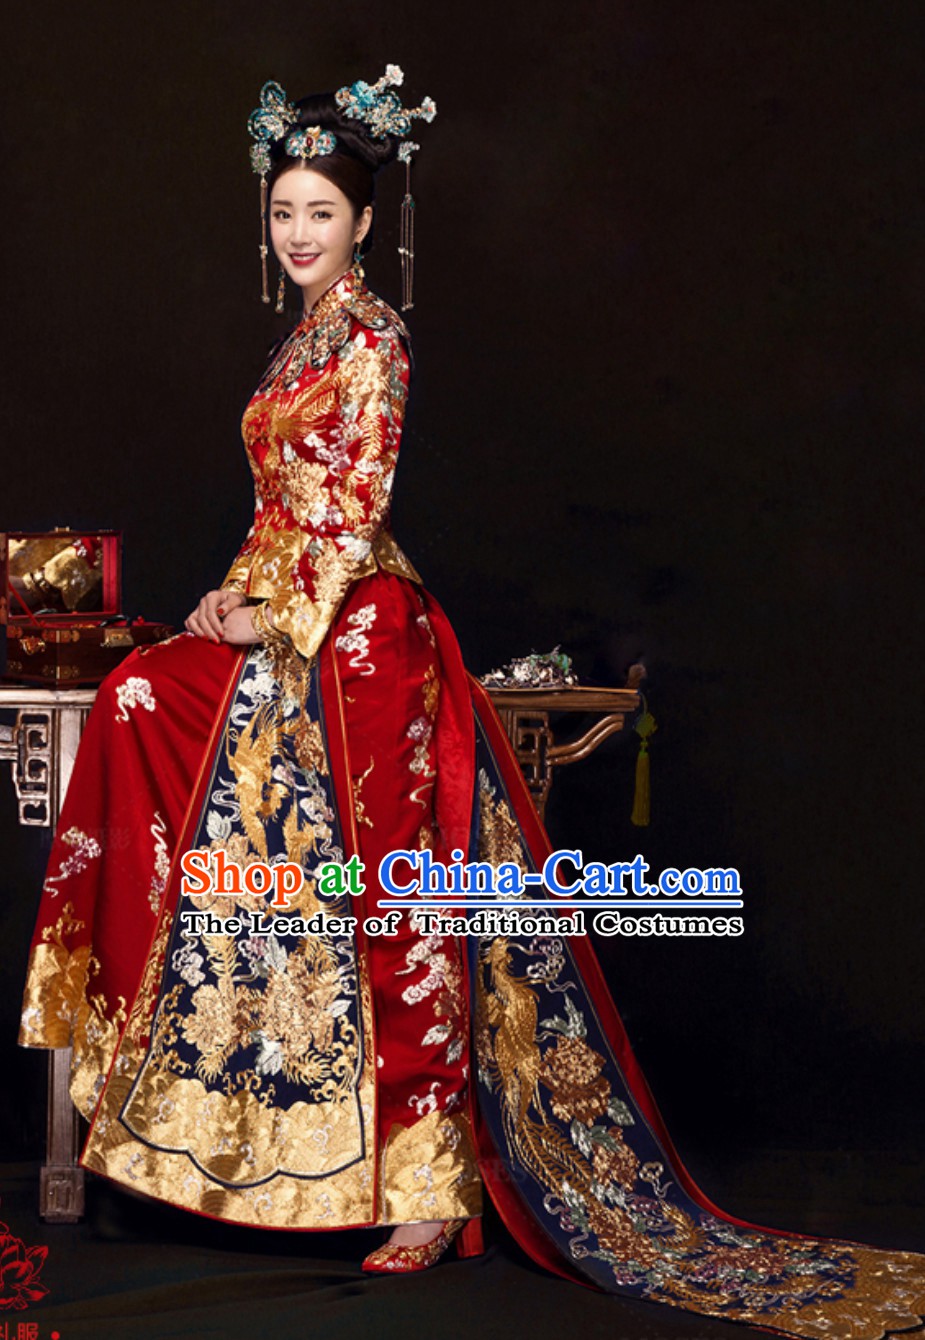 Chinese Traditional Phoenix Embroidery Wedding Dress Garment and Hair Jewelry Complete Set for Brides